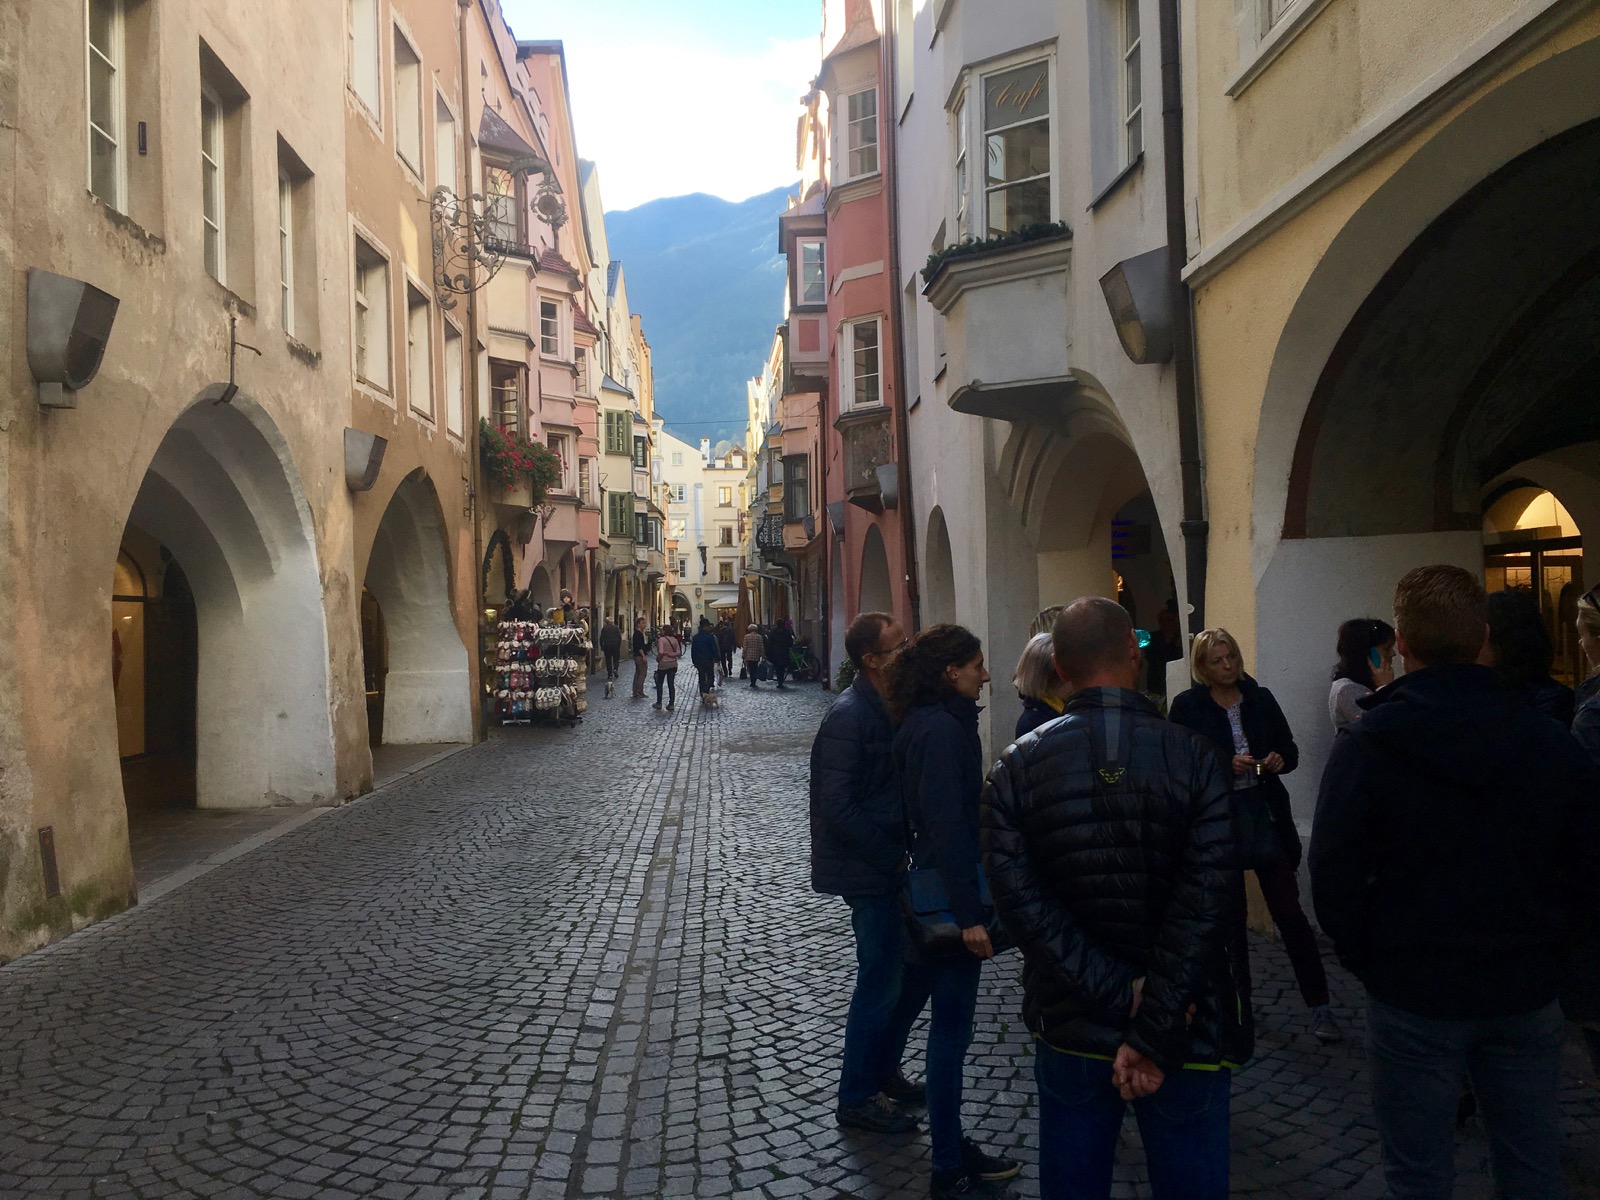 Guided tour around Brixen